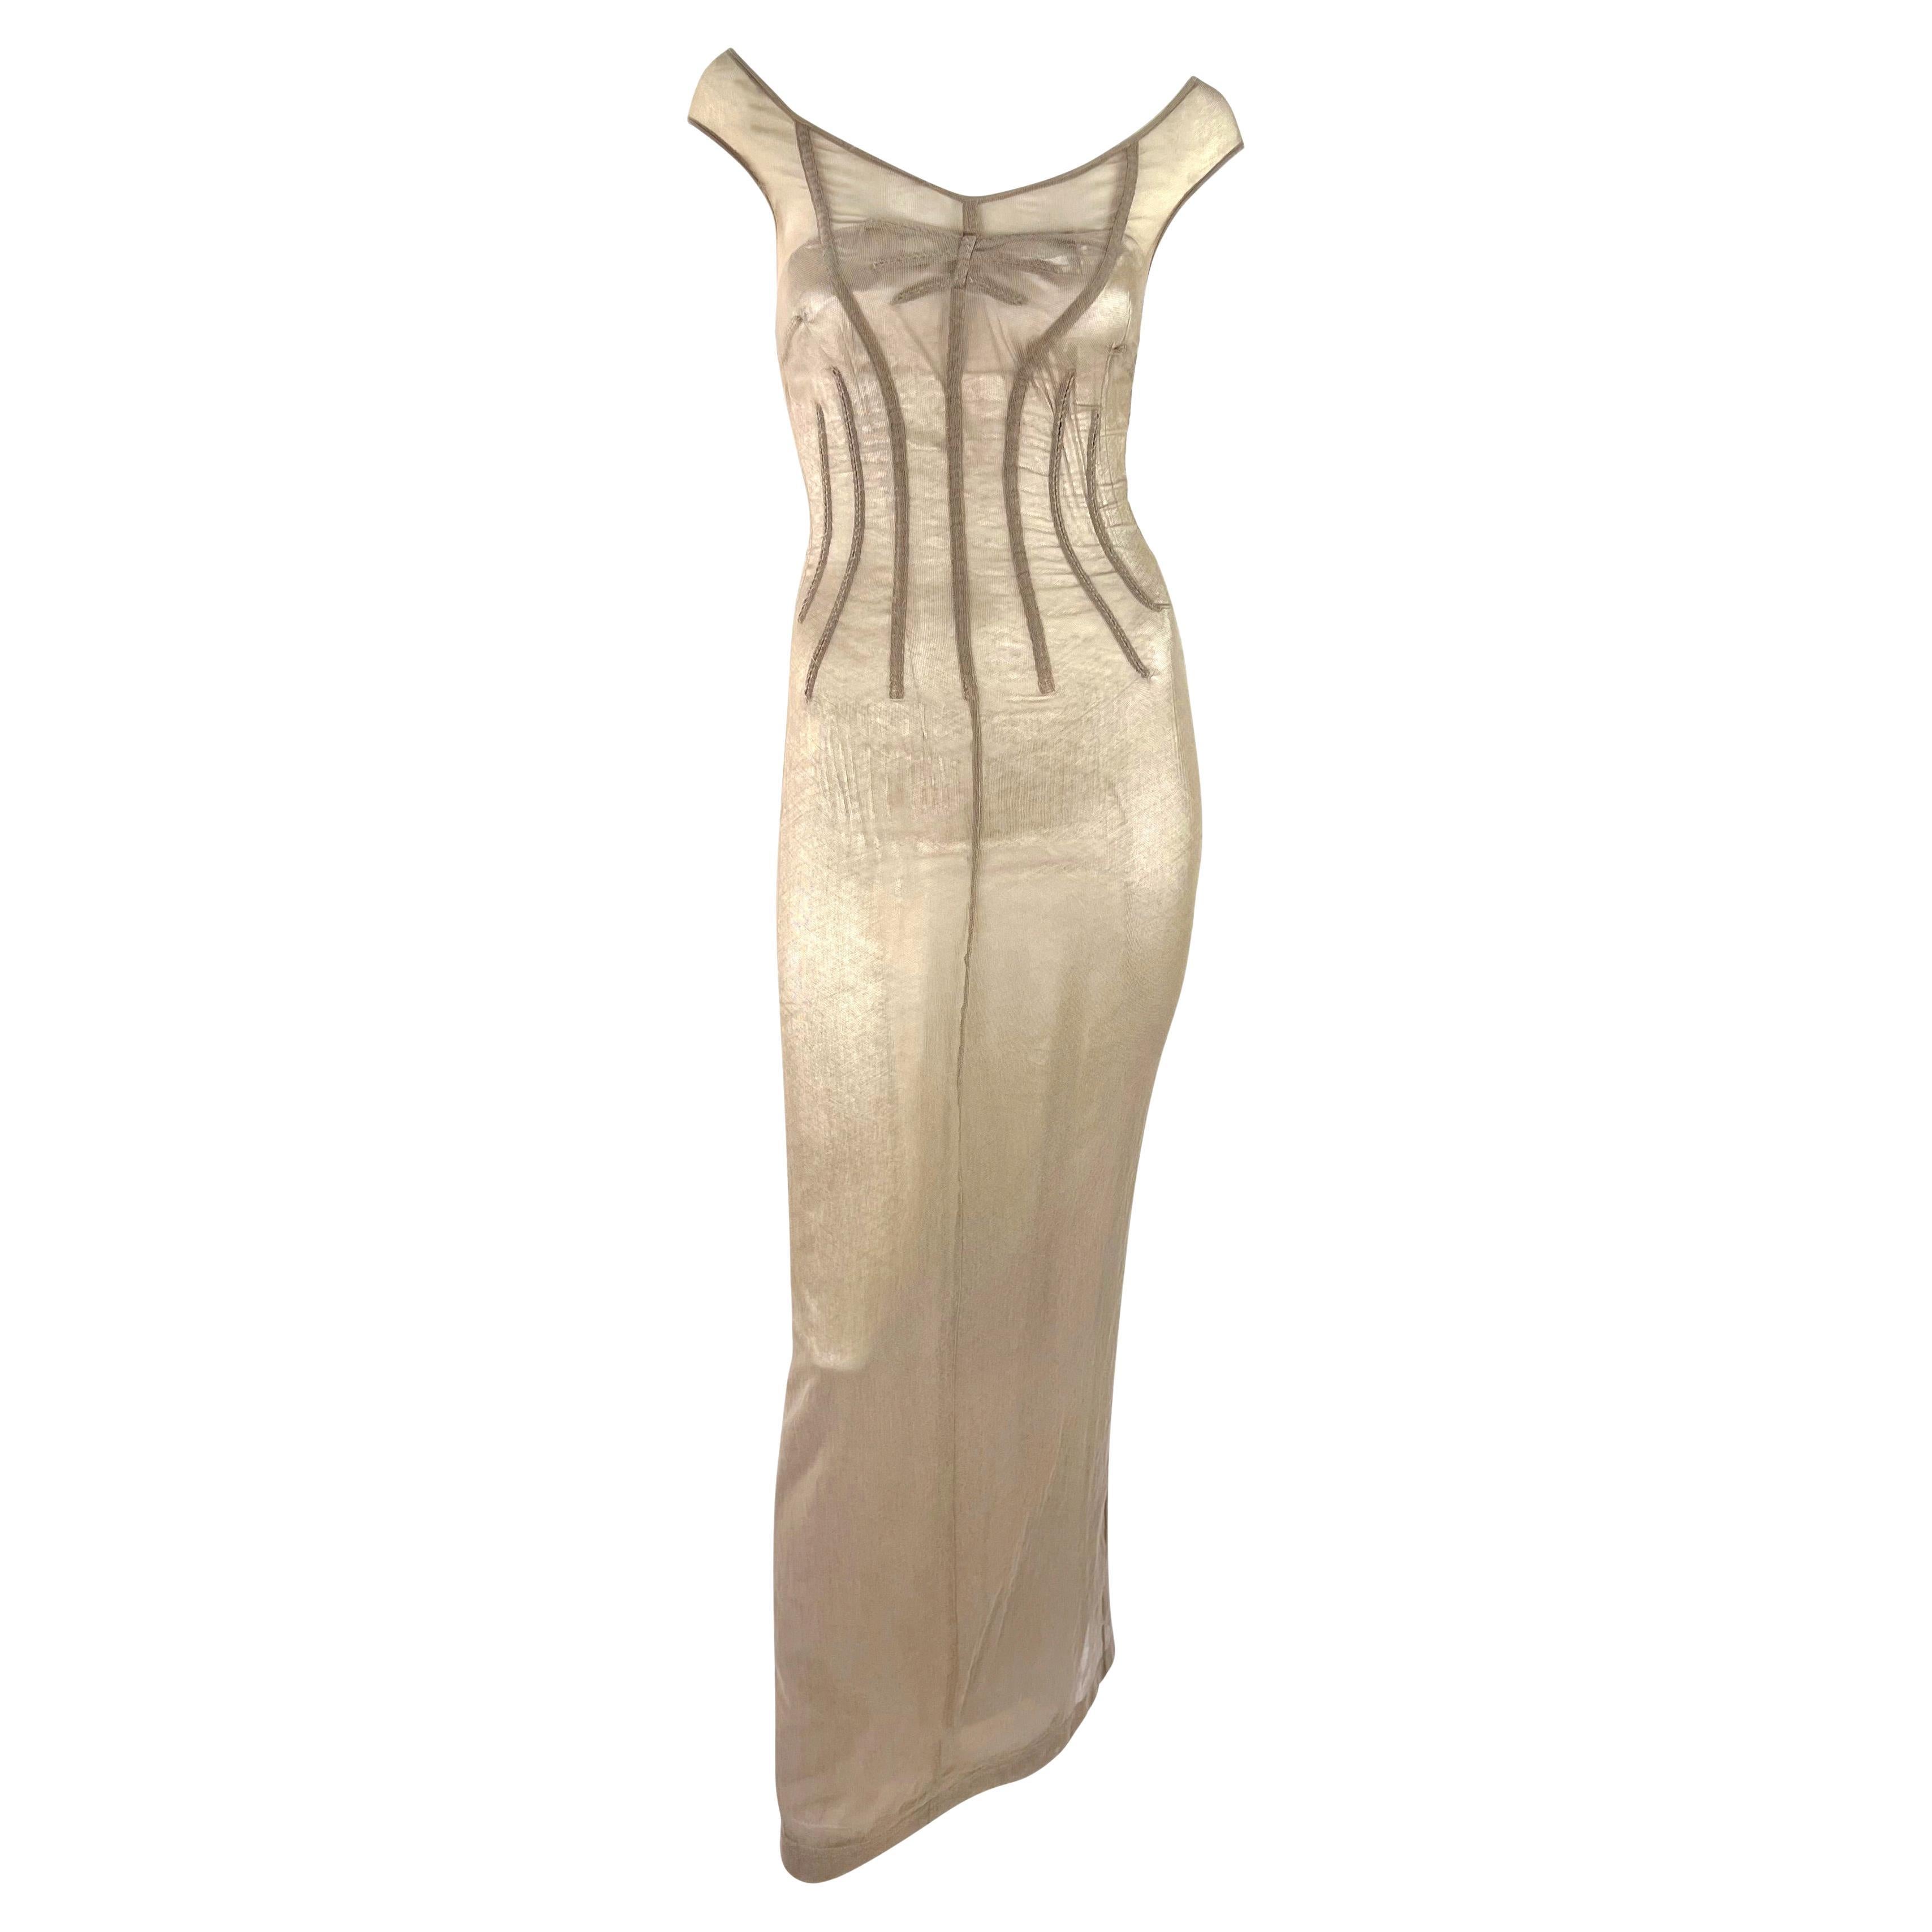 S/S 1998 Dolce & Gabbana 'Stromboli' Taupe Mesh Silver Bodycon Boned Gown  For Sale